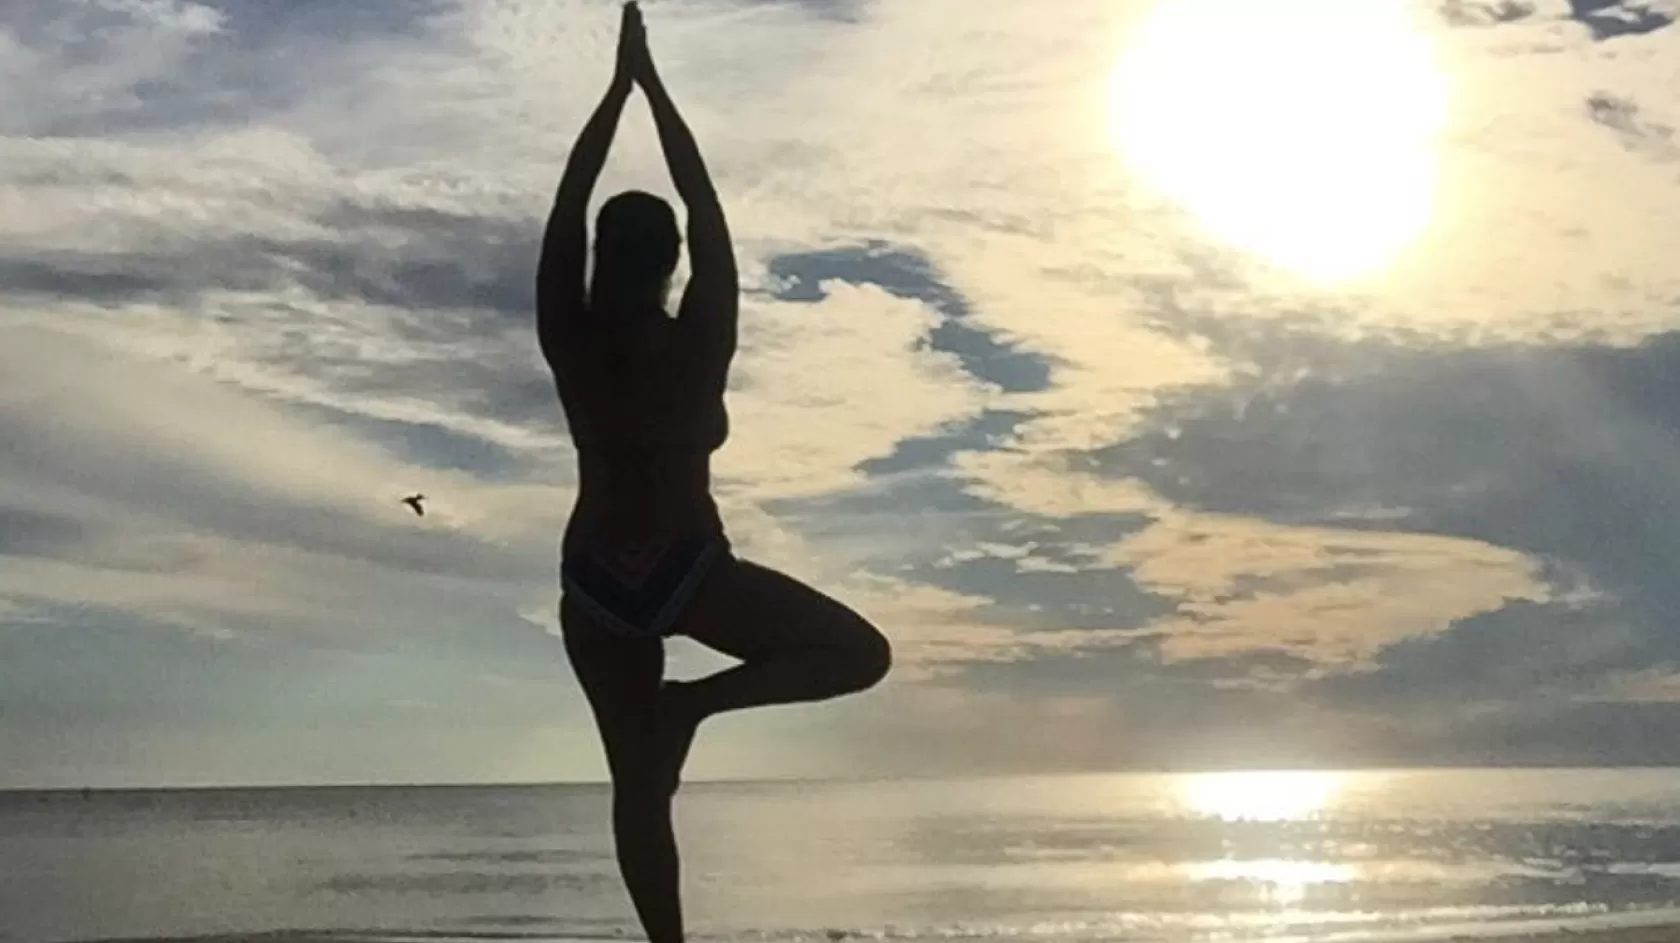 A woman on the beach does yoga at sunset